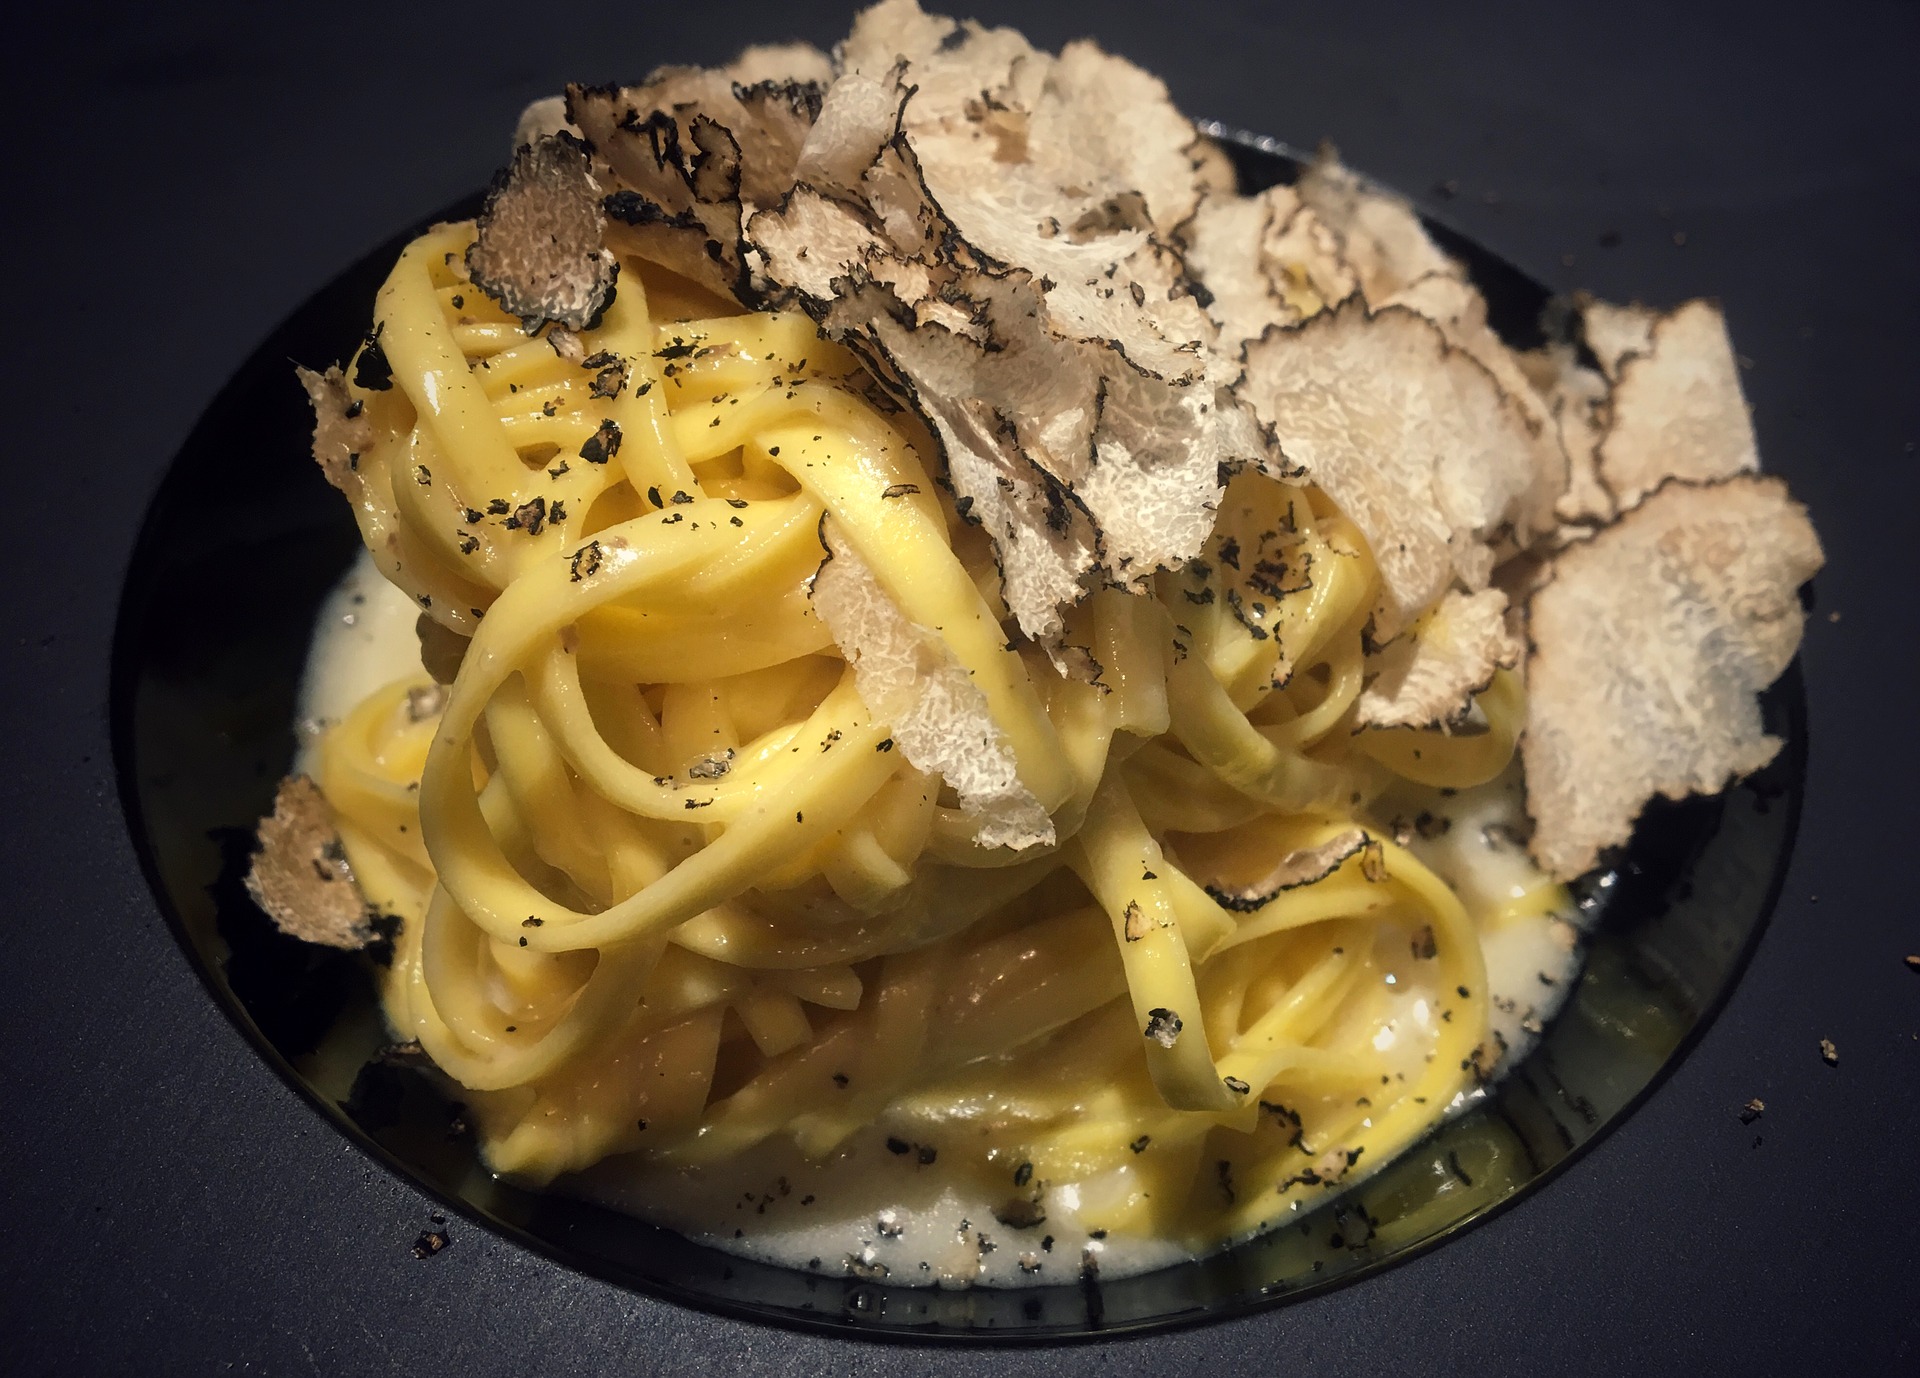 Pasta with truffle shavings on top